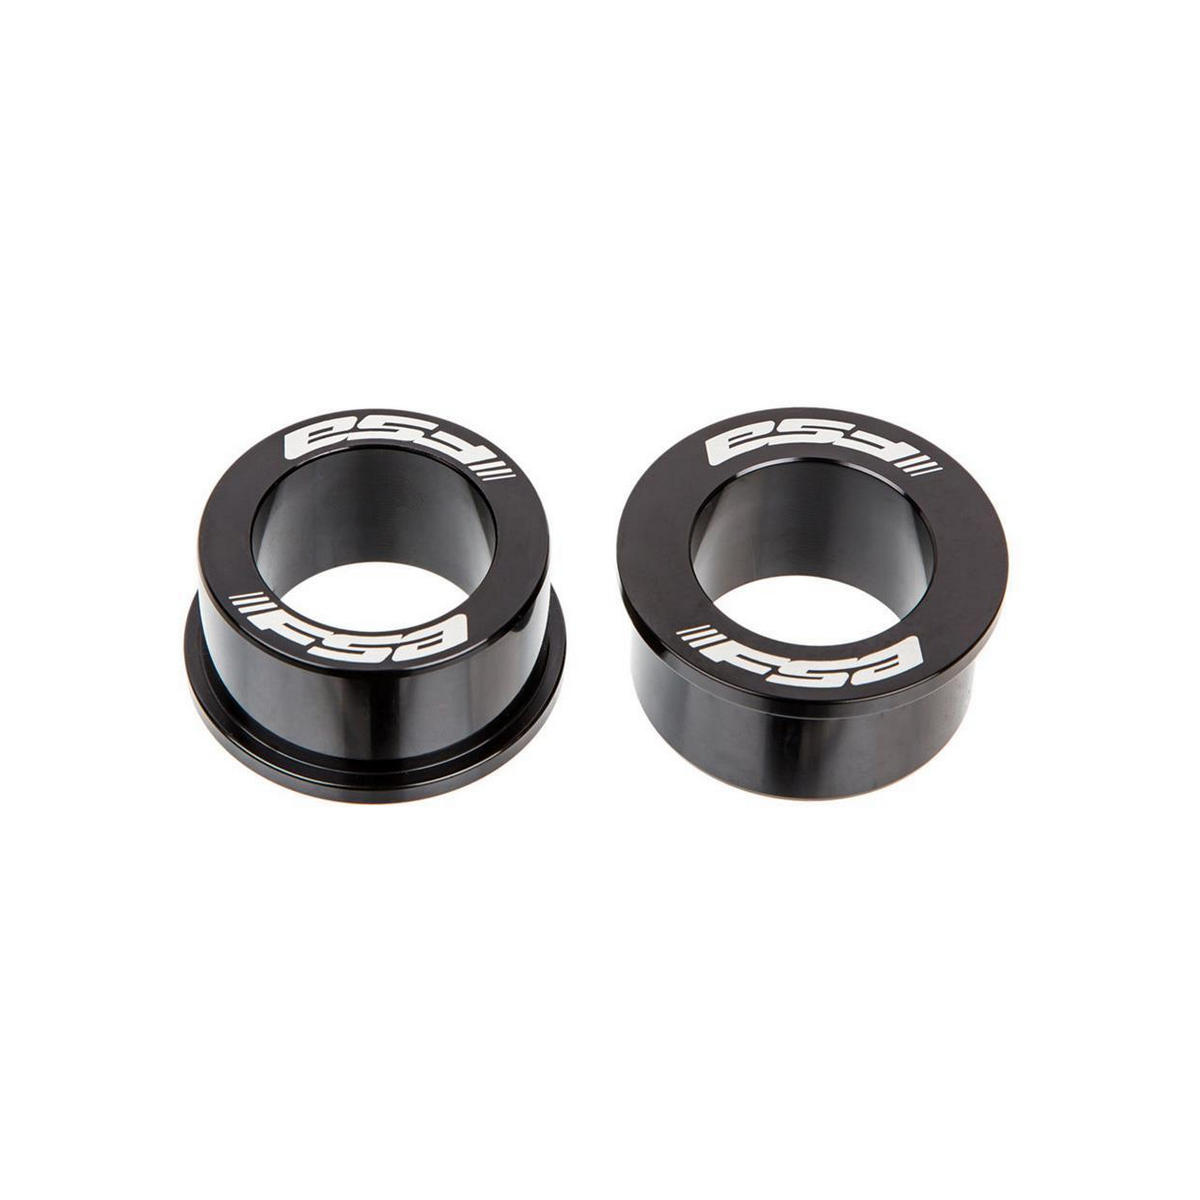 Headtube 1.5'' reducer cups for standard 1-1/8'' headset E0068